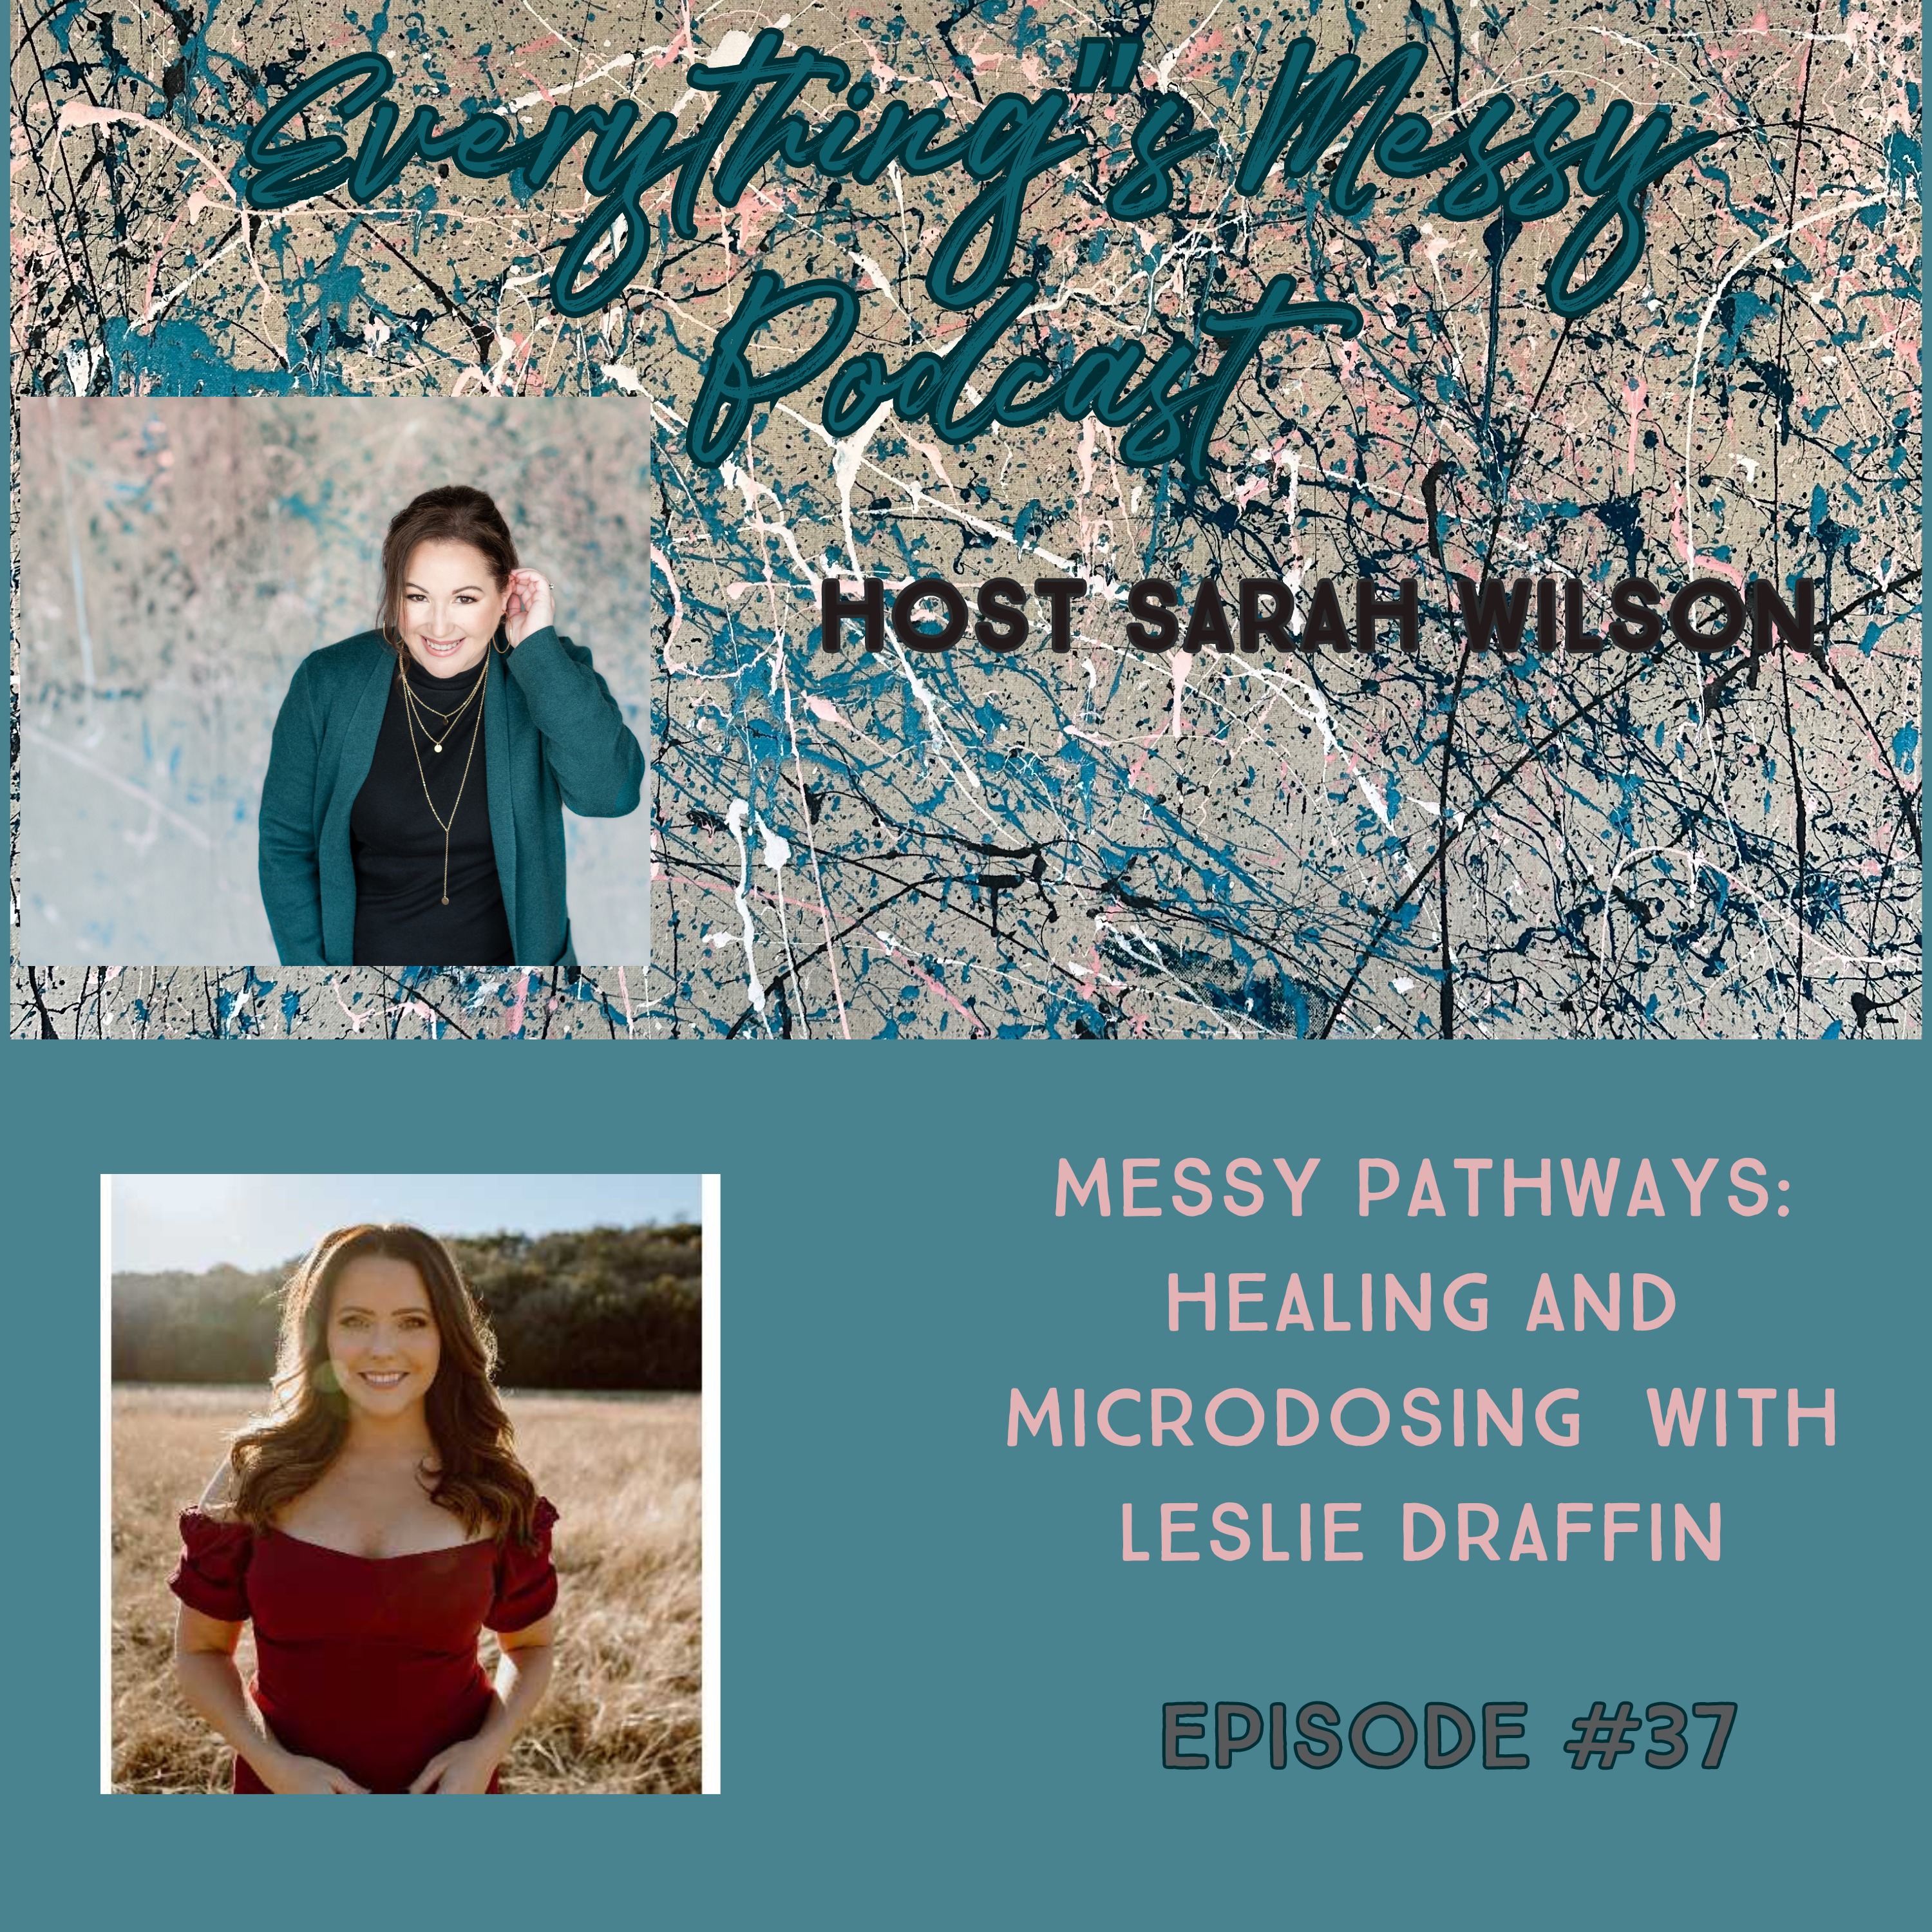 #37 Messy Pathways: Healing and Microdosing with Leslie Draffin